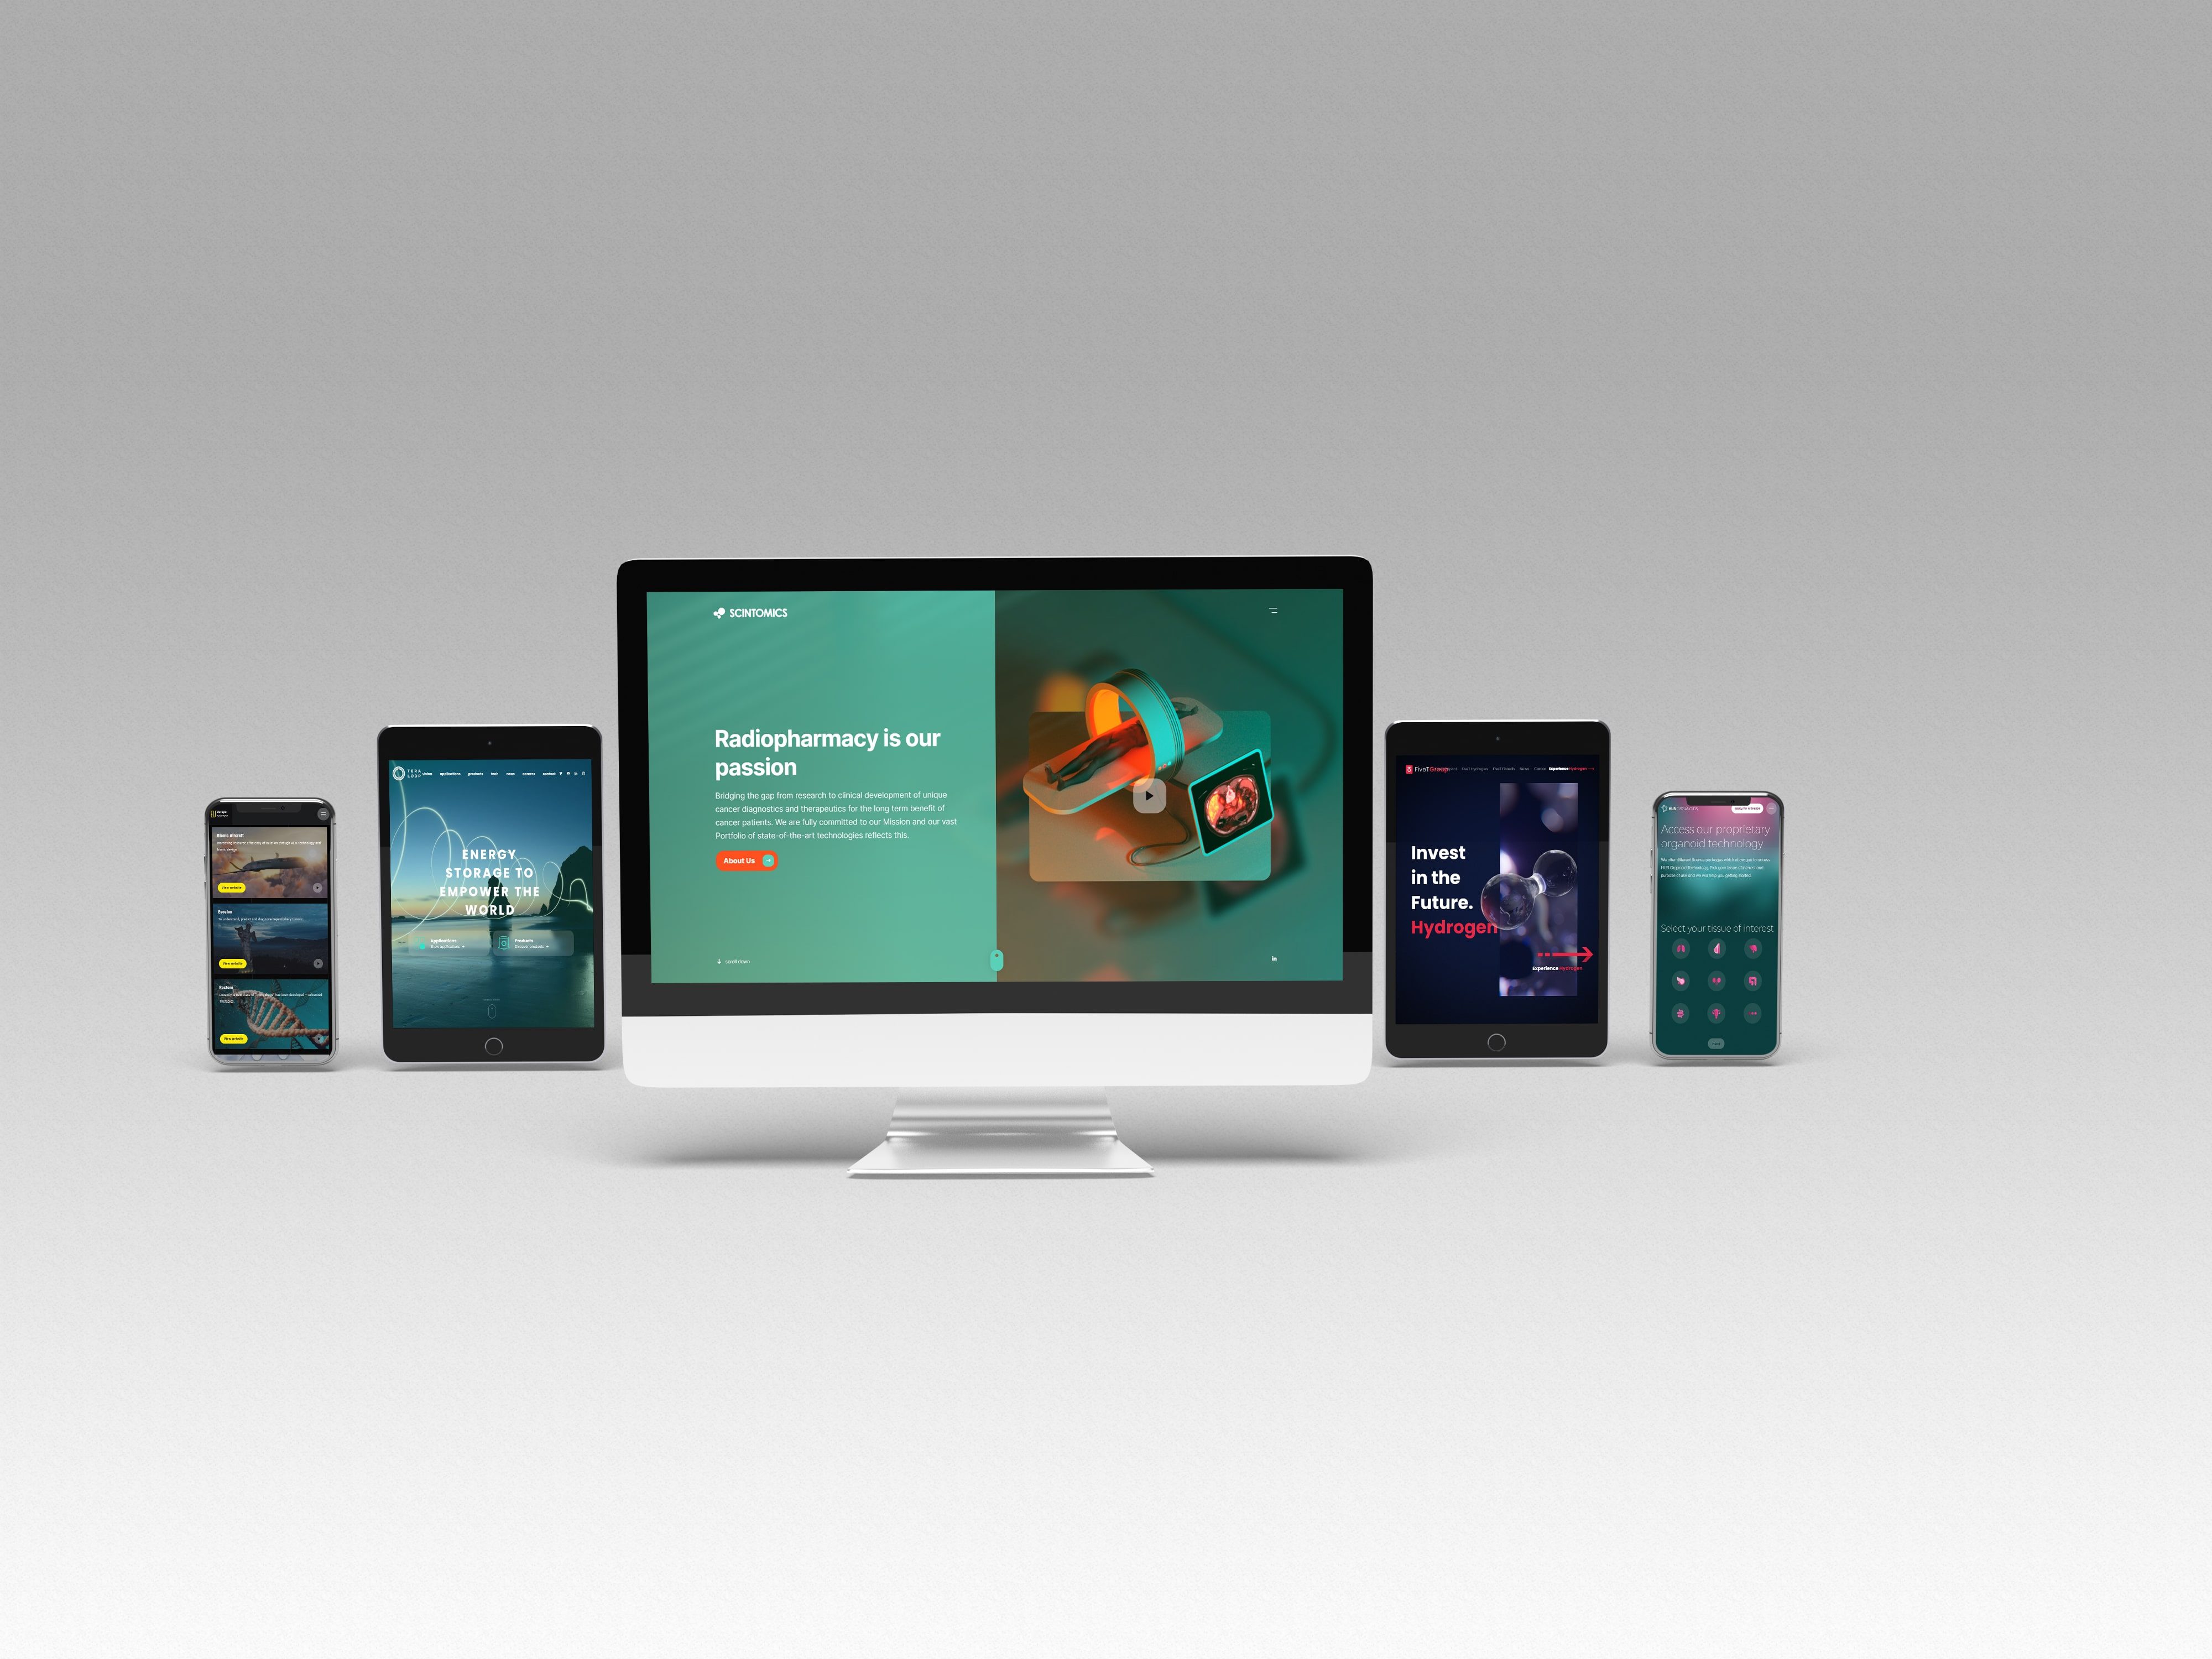 A display of multiple website Sensu has created for its clients